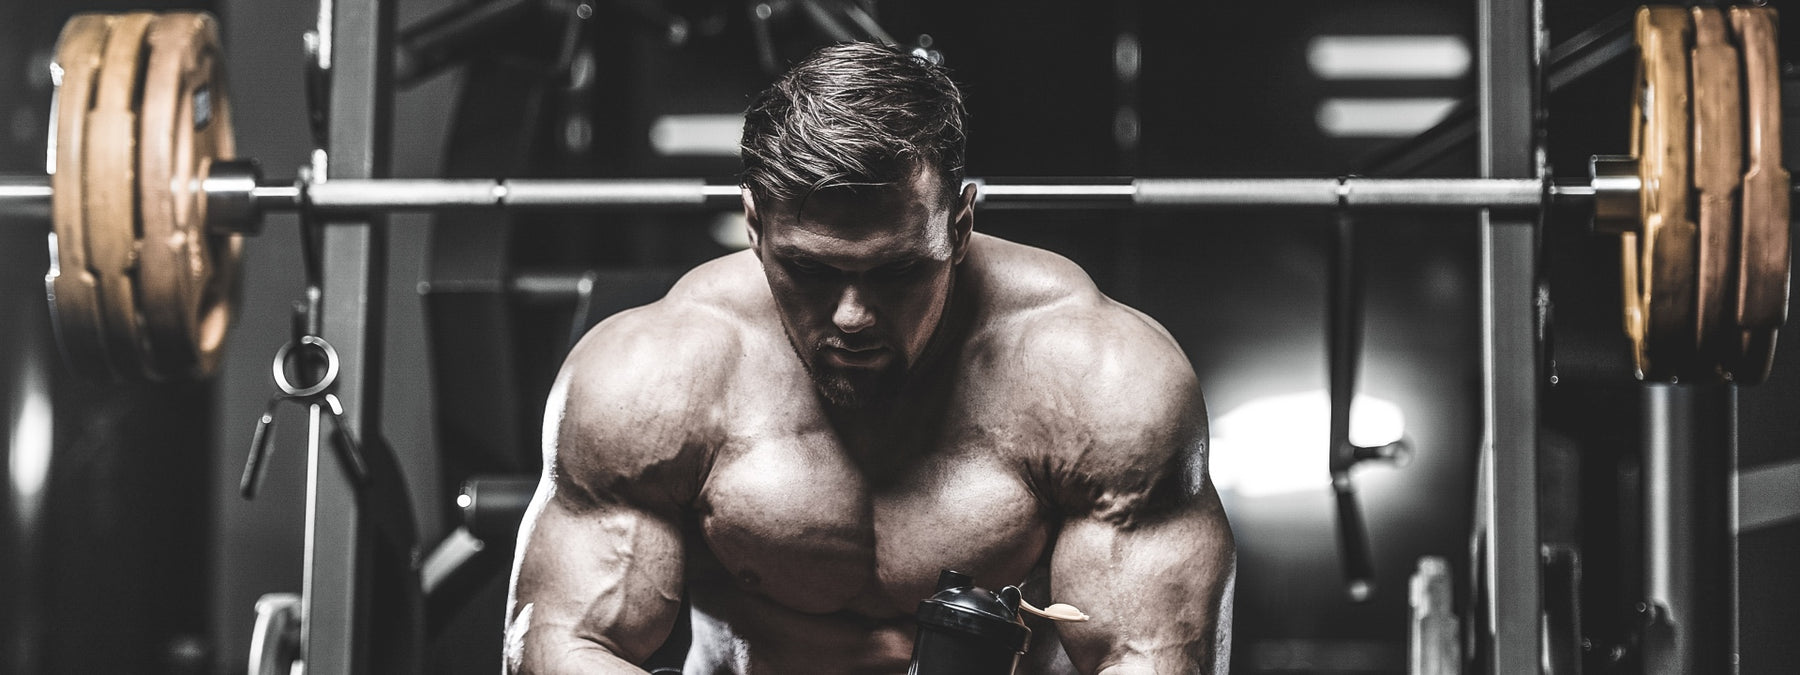 7 Habits Of Highly Effective Lifters